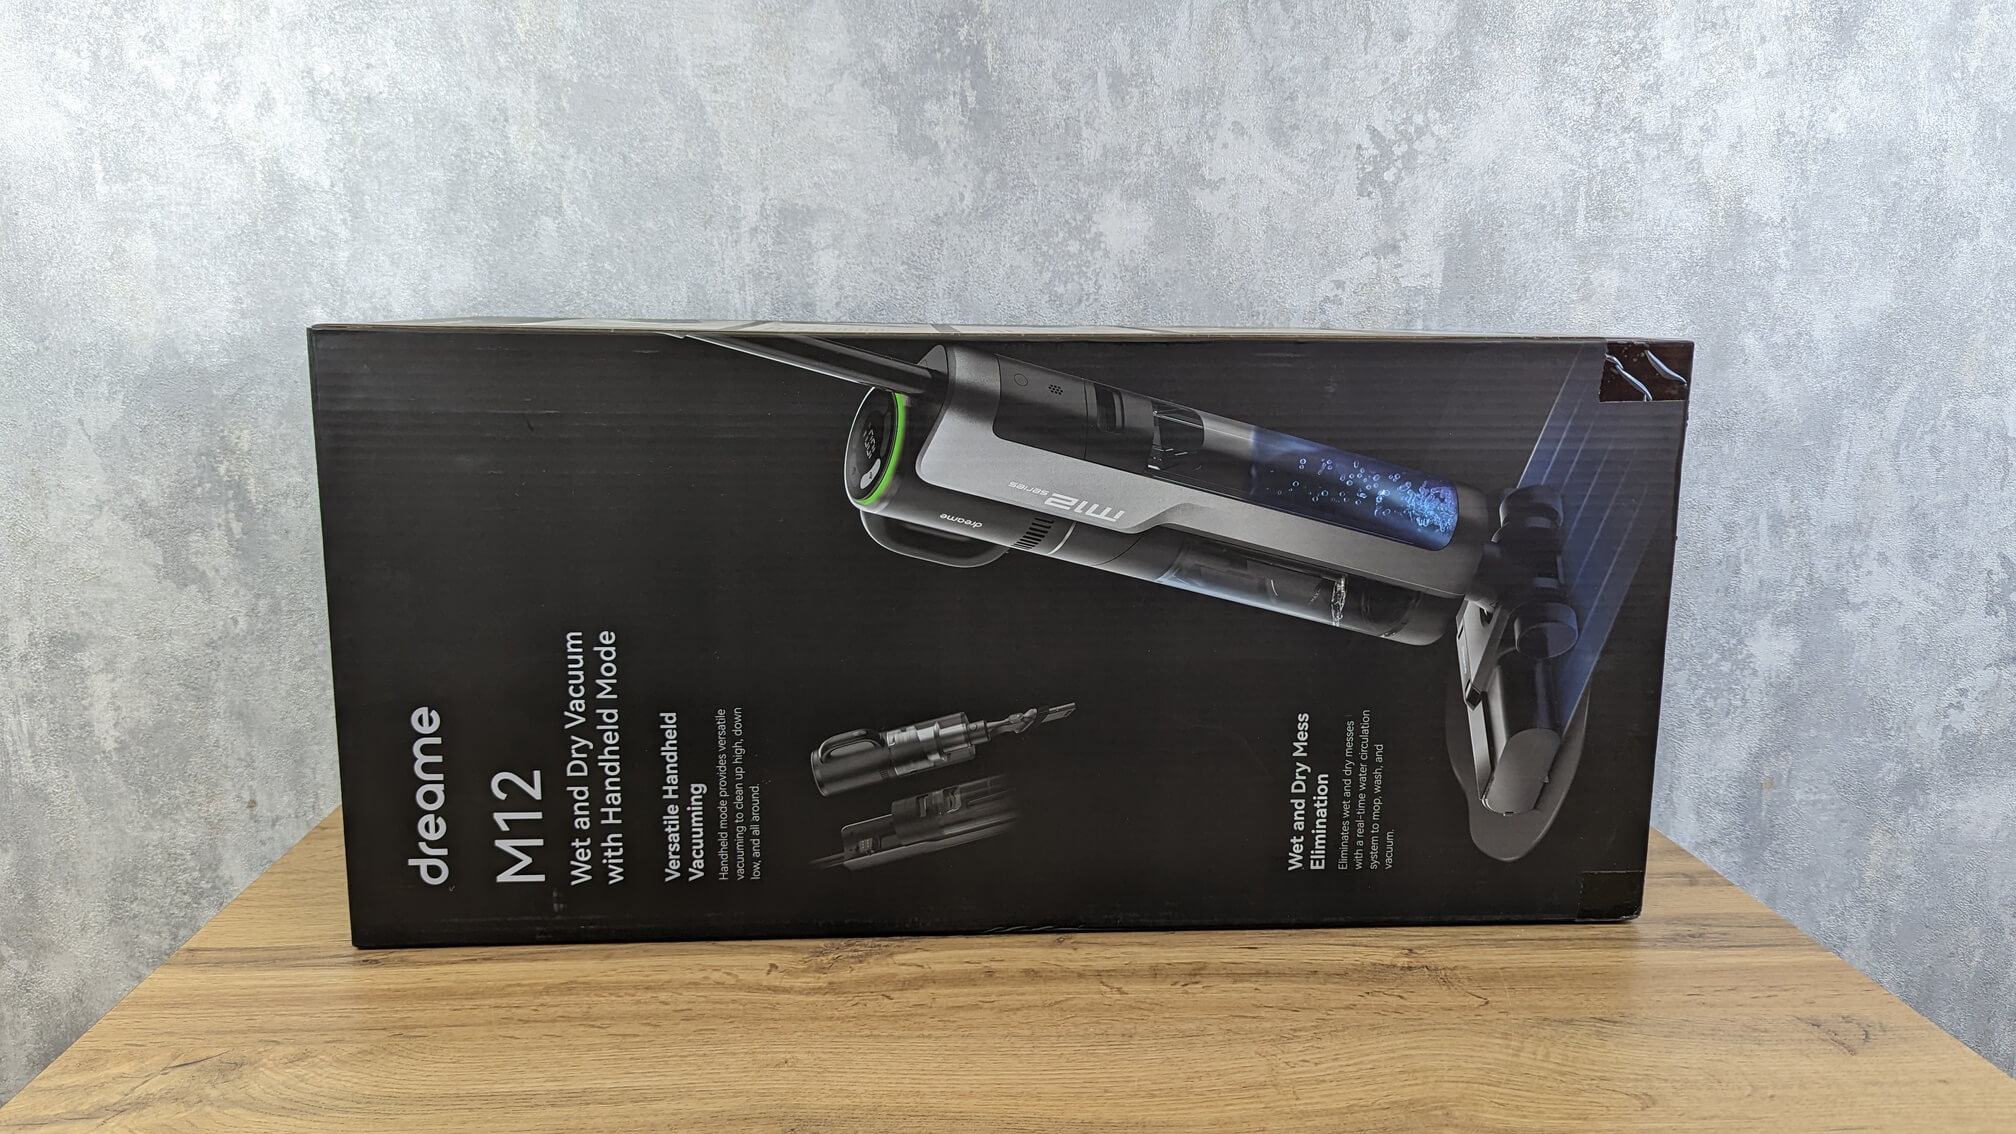 Dreame M12 Review & Test: of? what vacuum this capable is